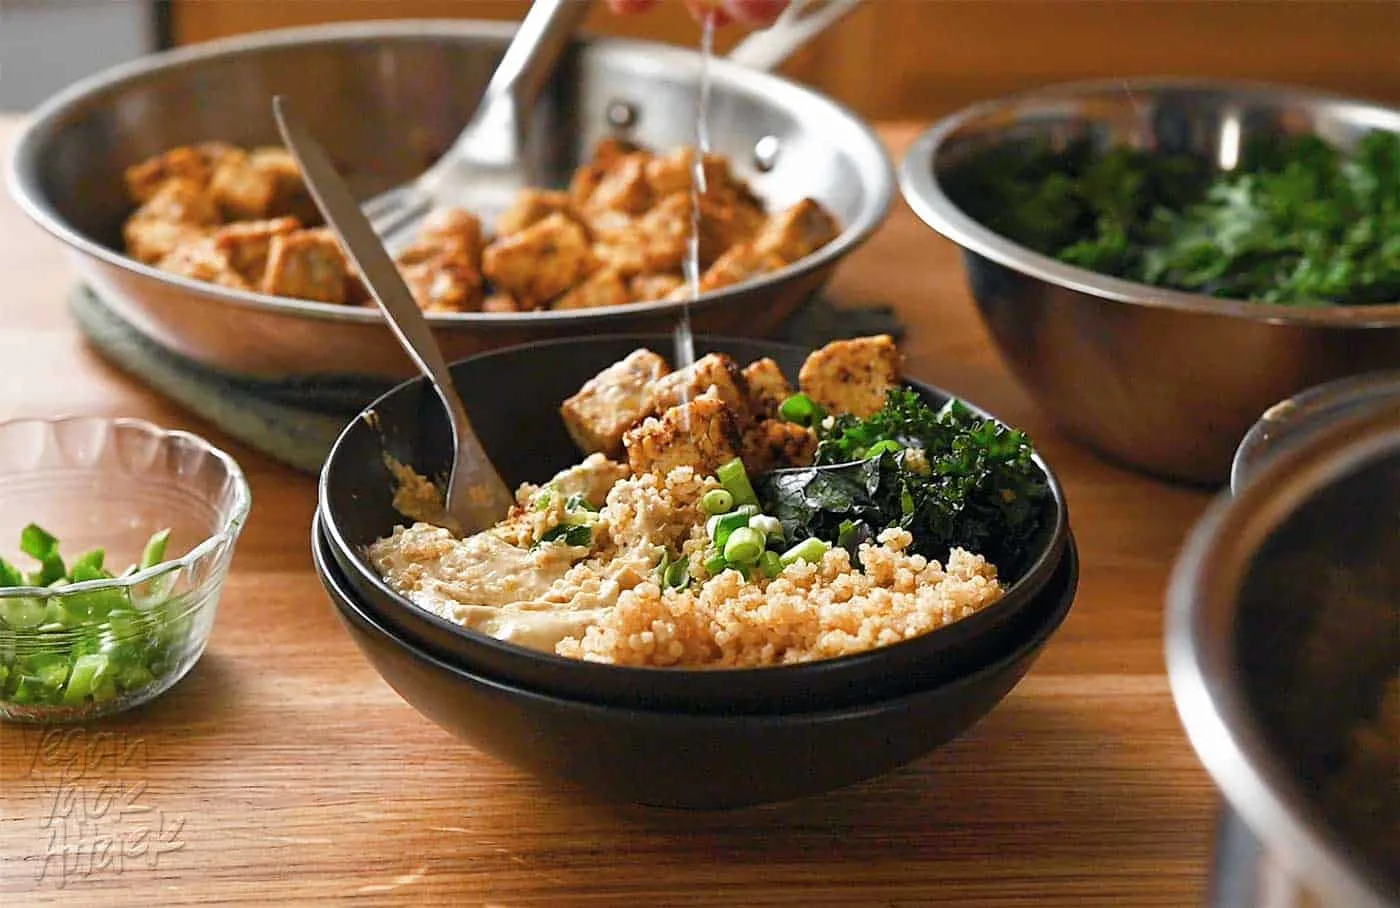 Lemon wedge being squeezed over a bowl with quinoa, kale, tempeh, and spread